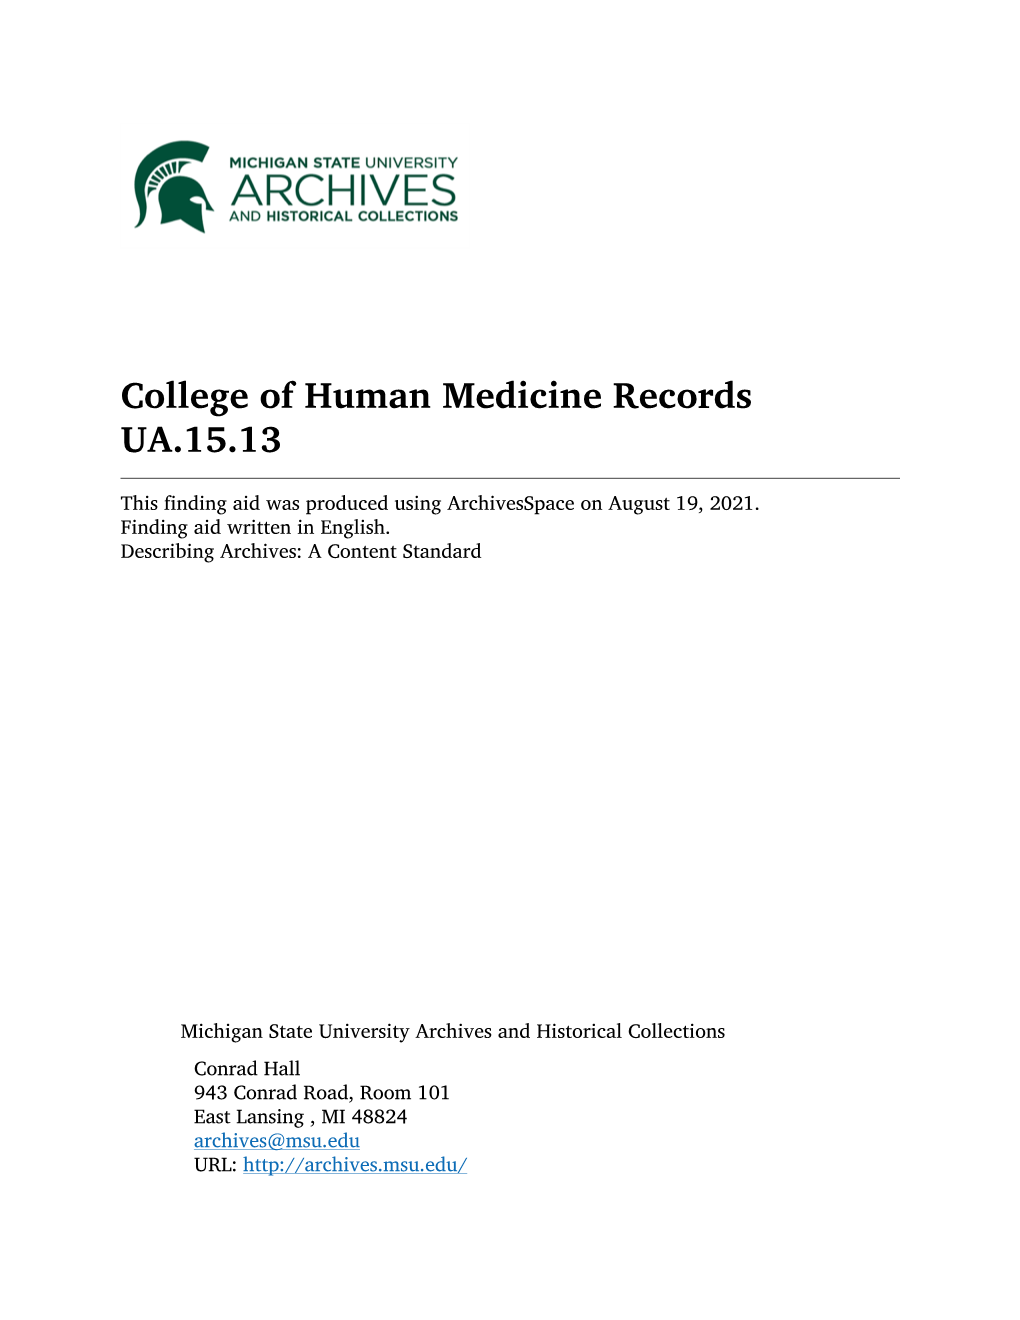 College of Human Medicine Records UA.15.13 This Finding Aid Was Produced Using Archivesspace on August 19, 2021